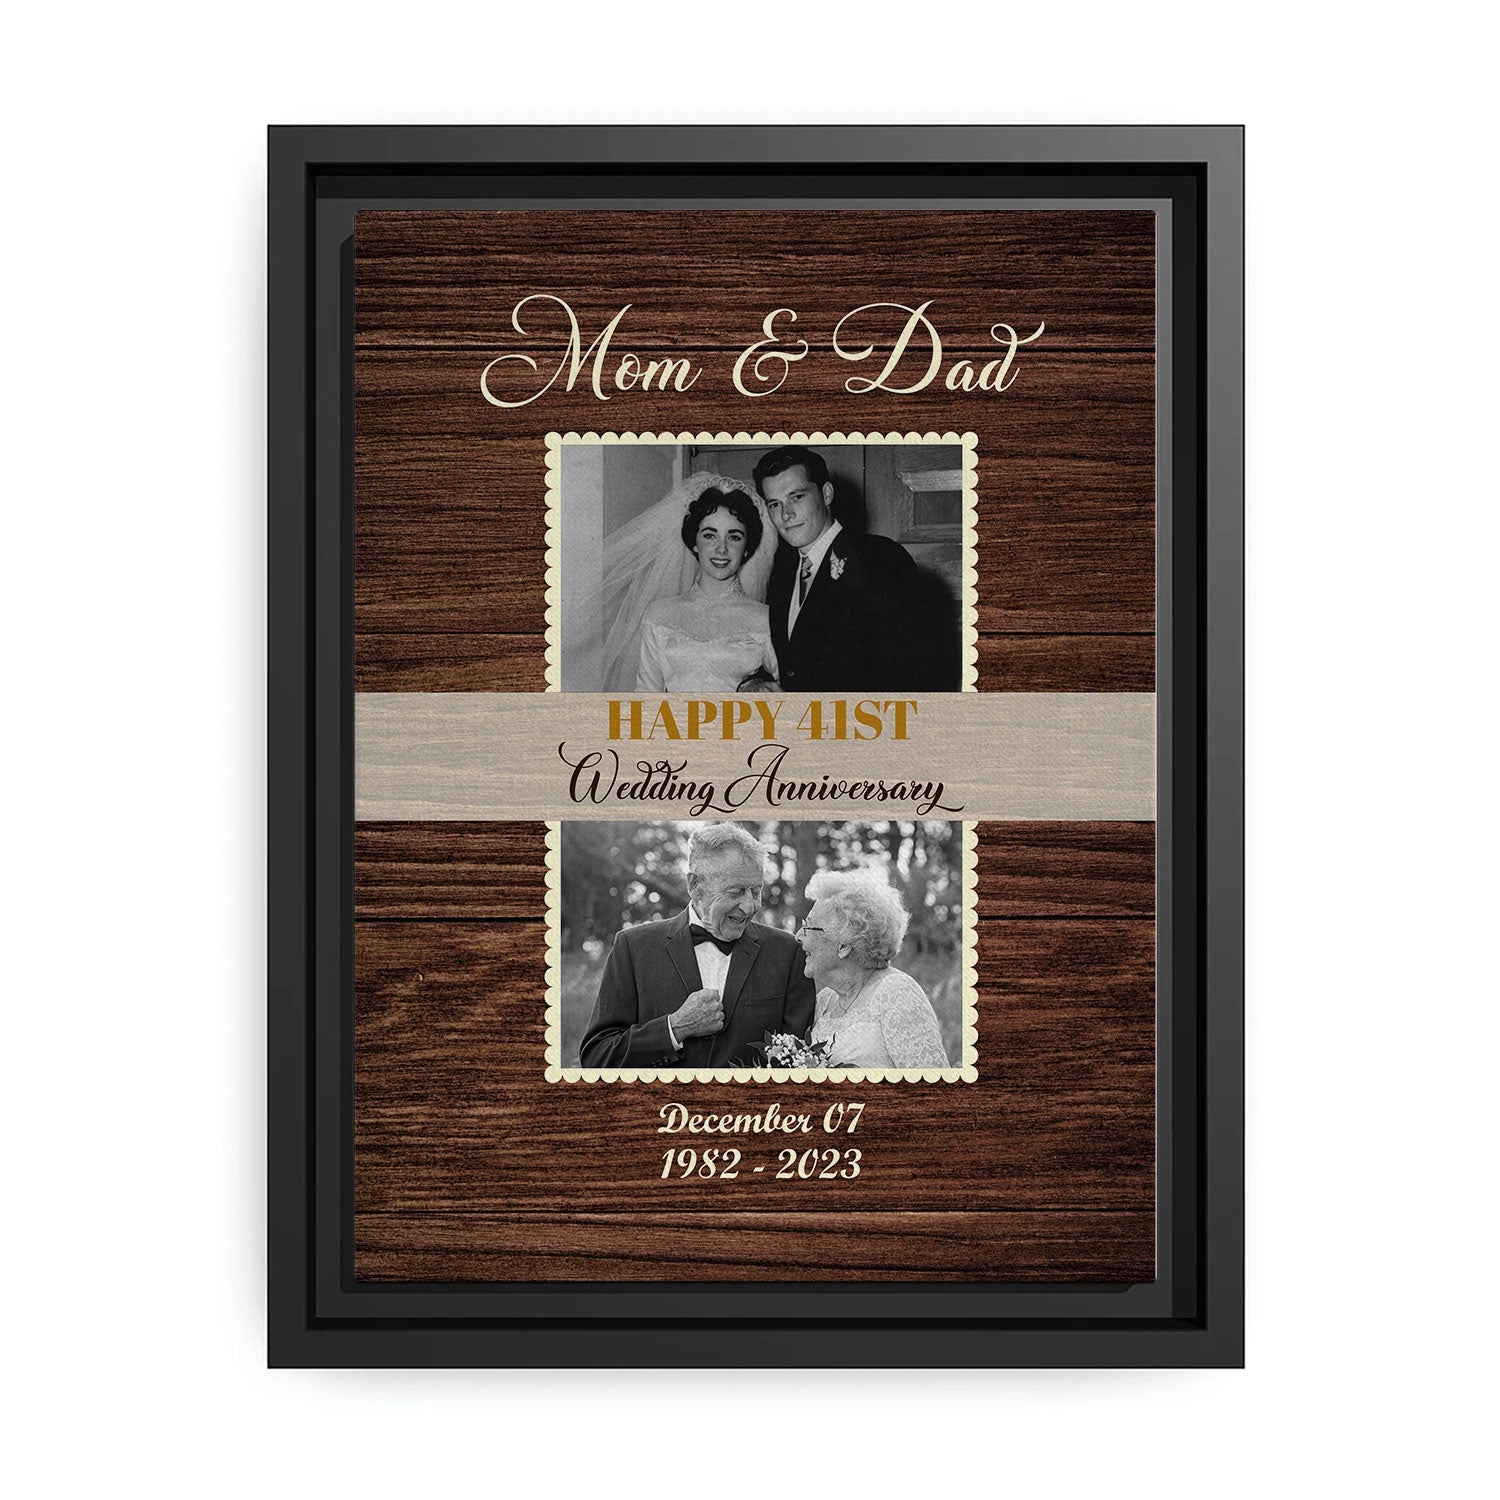 Anniversary gifts for parents from kids gift ideas mom dad